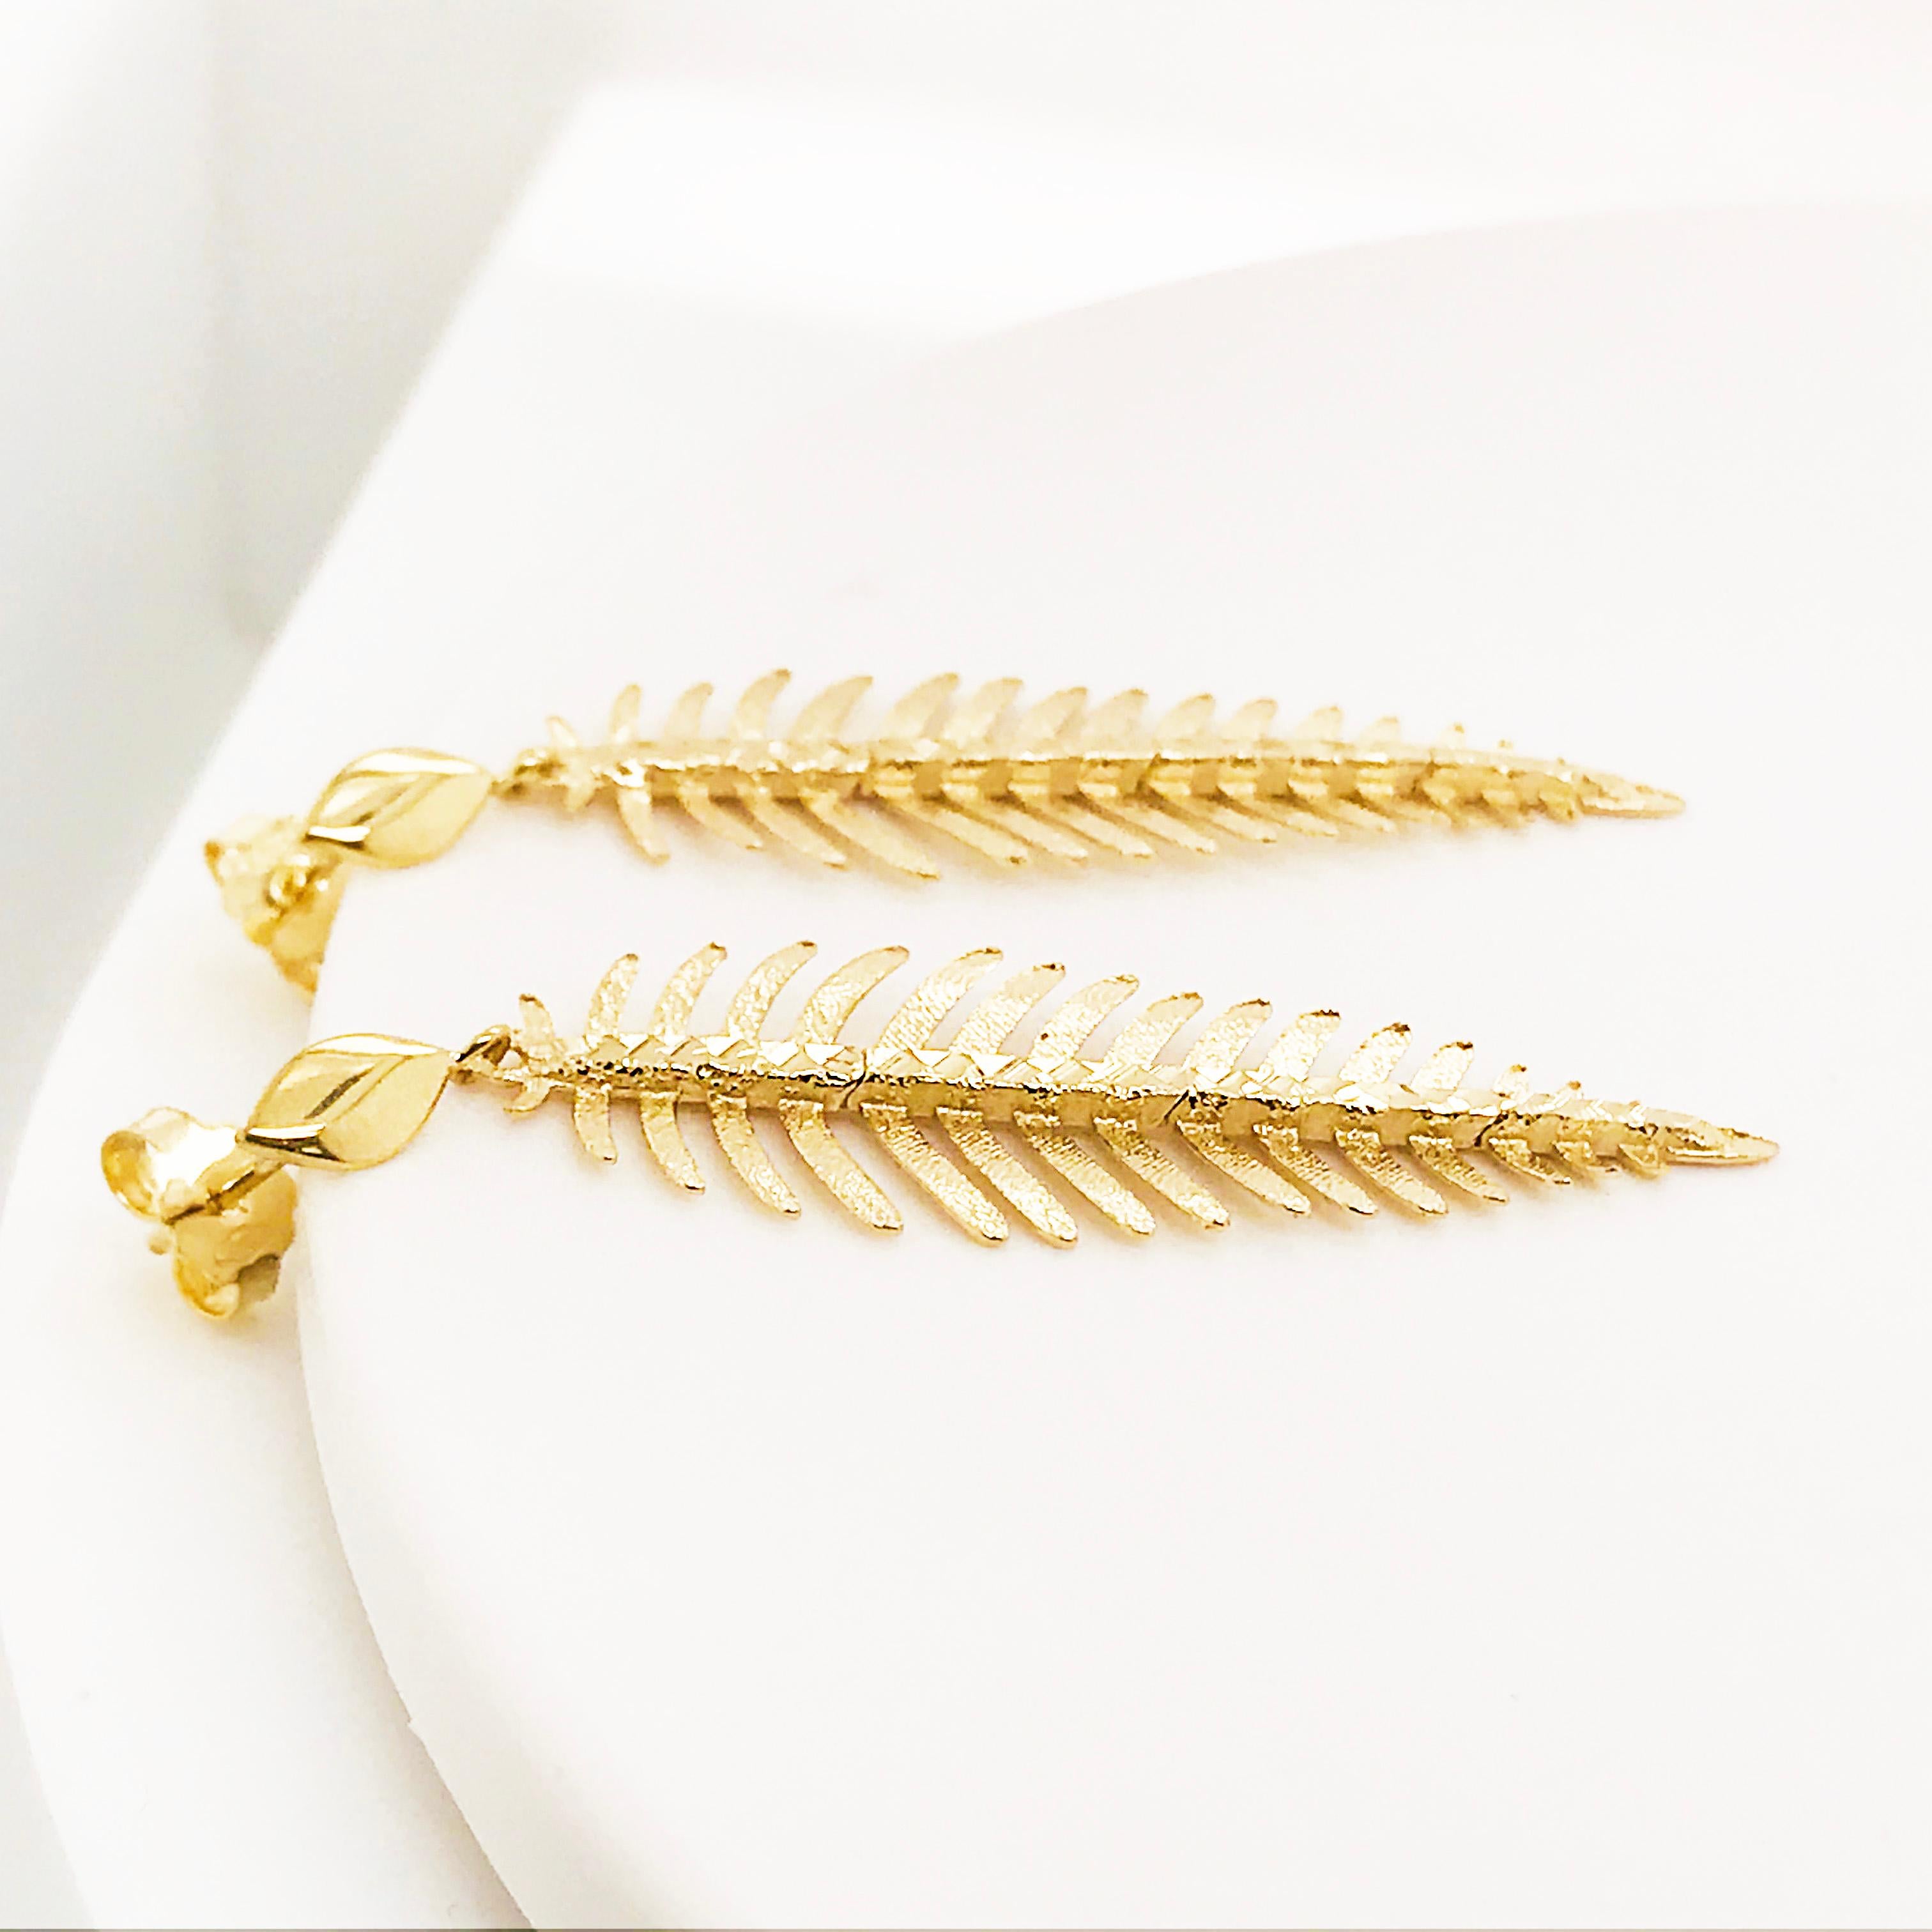 These clever earrings are solid 14 karat yellow gold and move when you move!  Perfect when you want your earrings to show!  They have a beautiful sparkle when the light hits them!  The details are as follows:
Metal Quality: 14K Yellow Gold
Earring